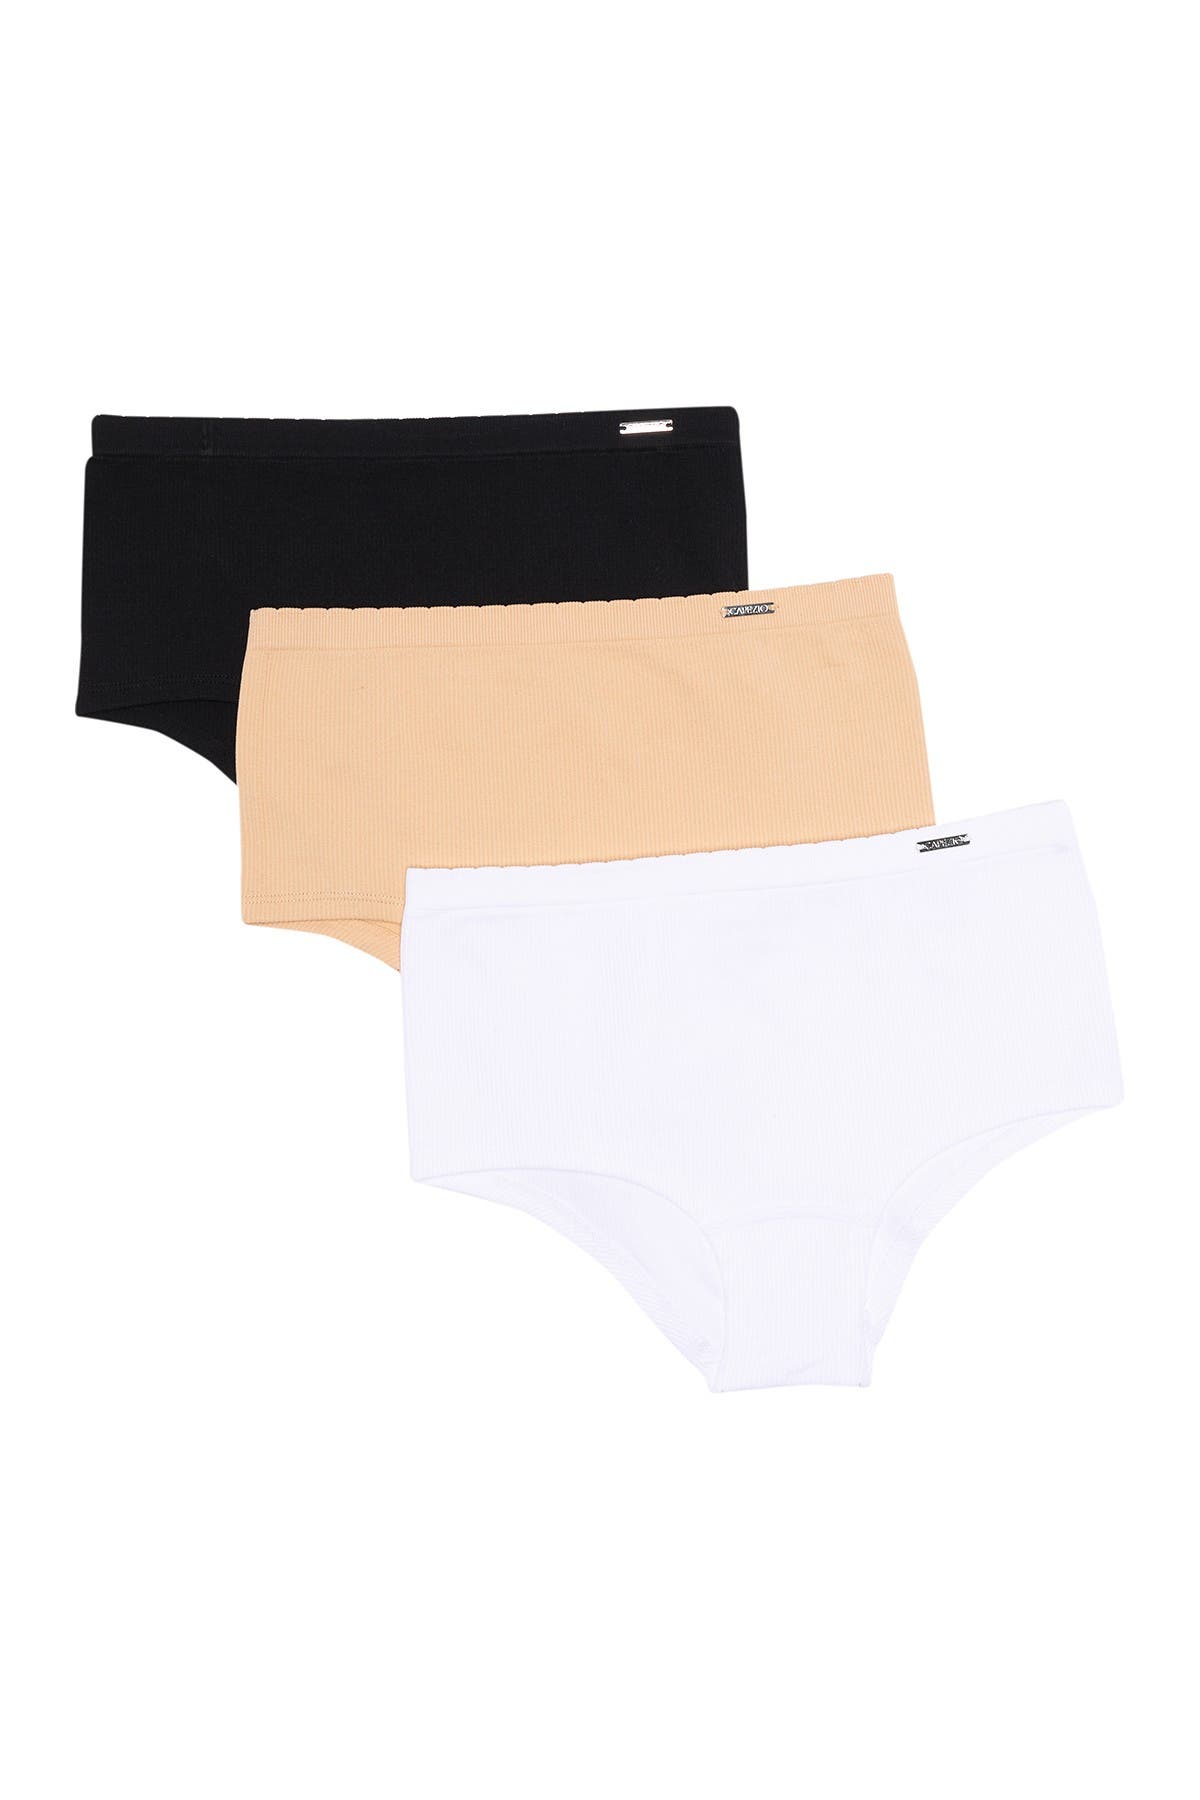 Studio By Capezio Seamless Ribbed Panties In Blk/short Bread/ Wht